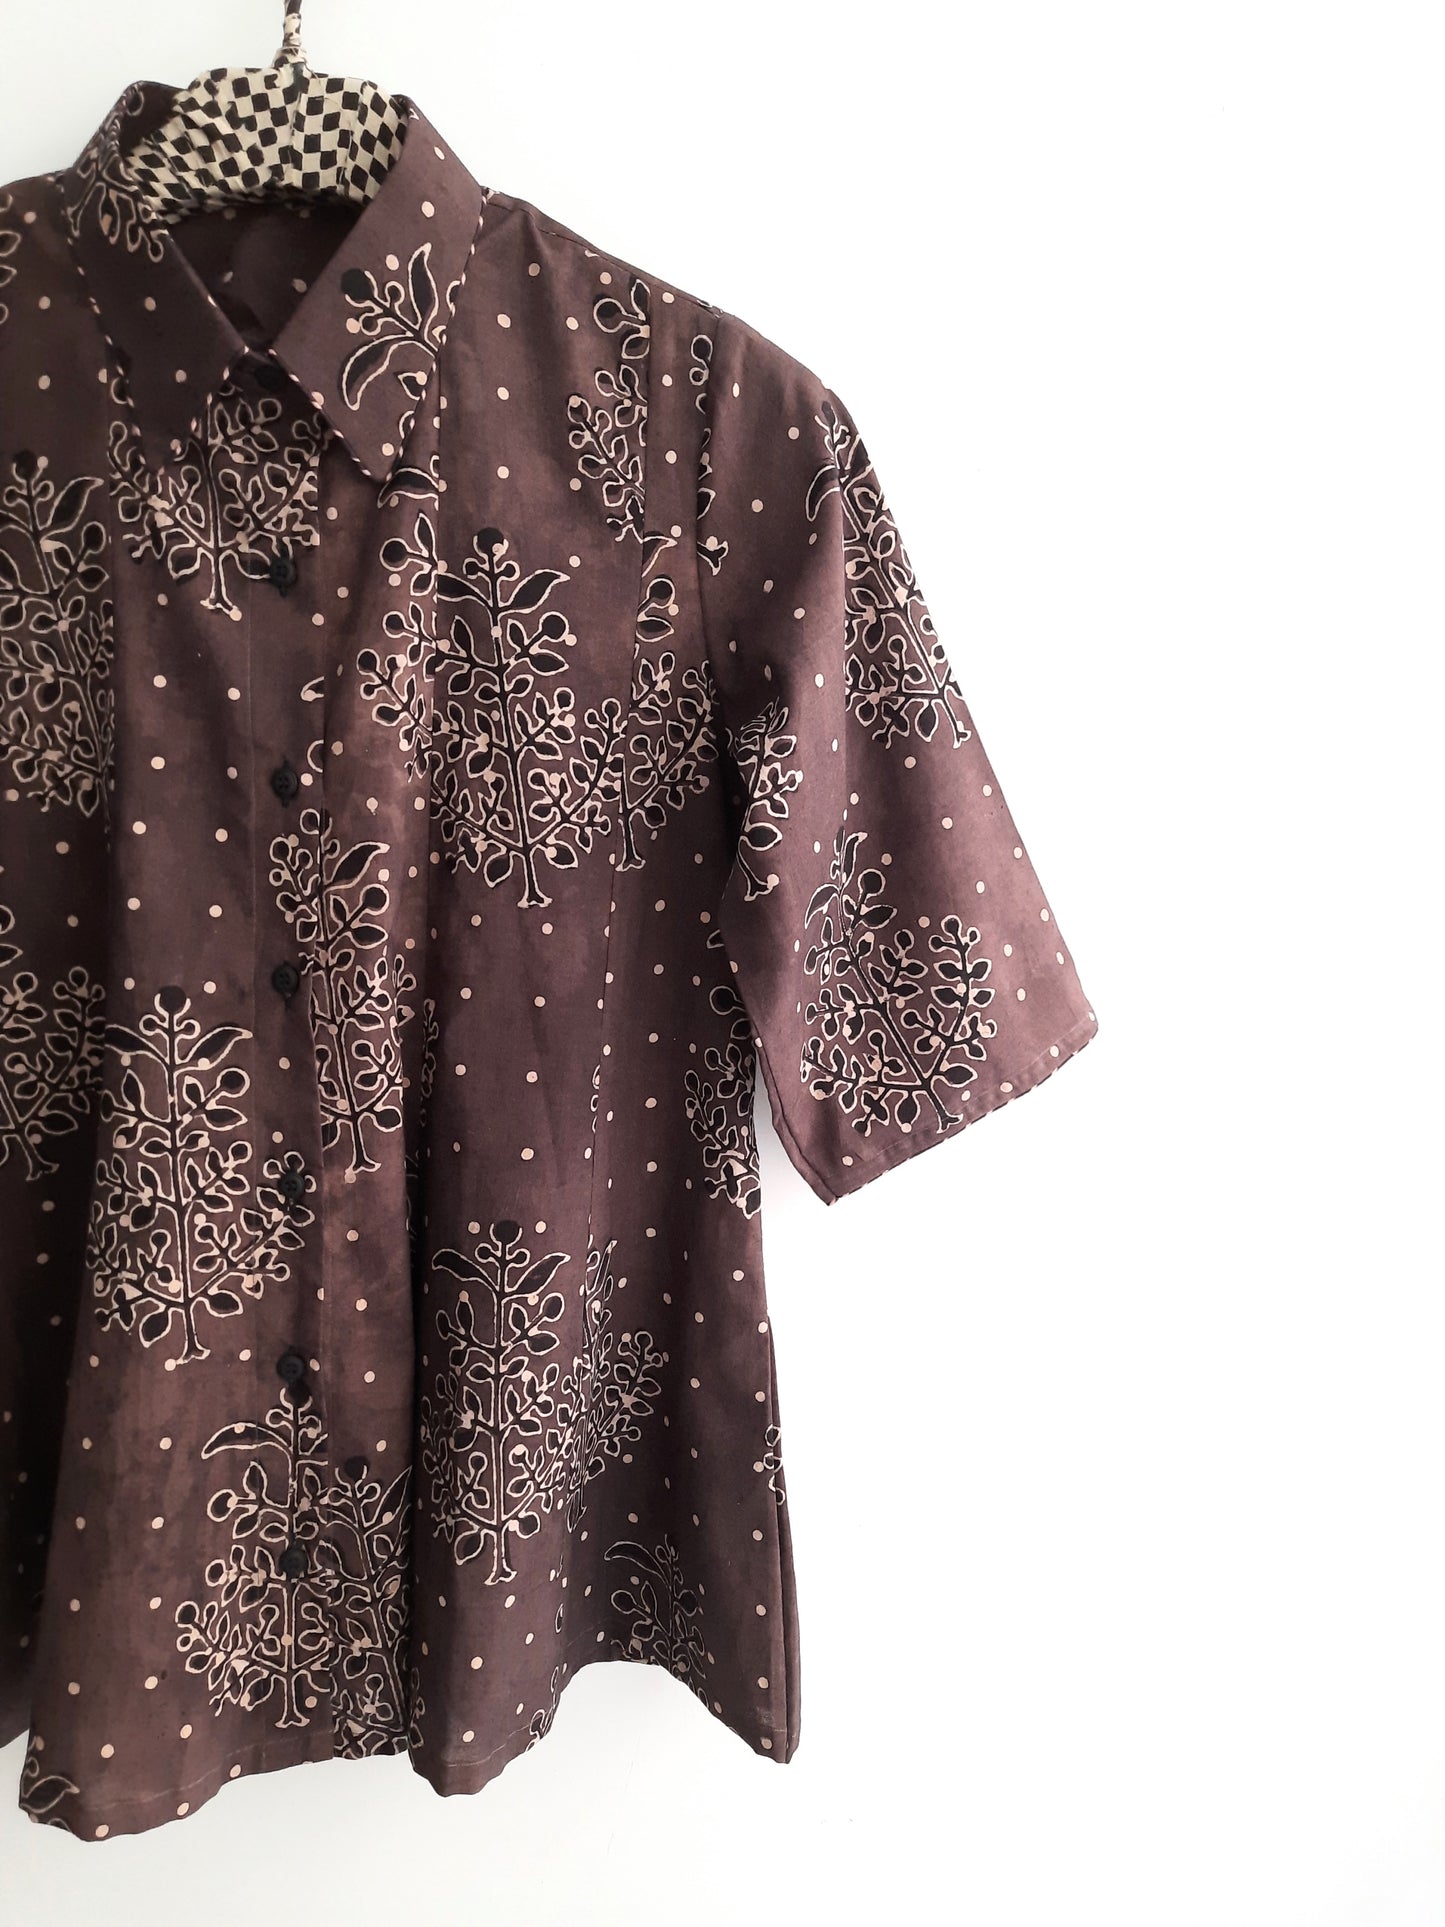 Brown Ajrakh hand block printed cotton shirt for women, showcasing intricate patterns and natural dye craftsmanship, ideal for breathable summer wear.